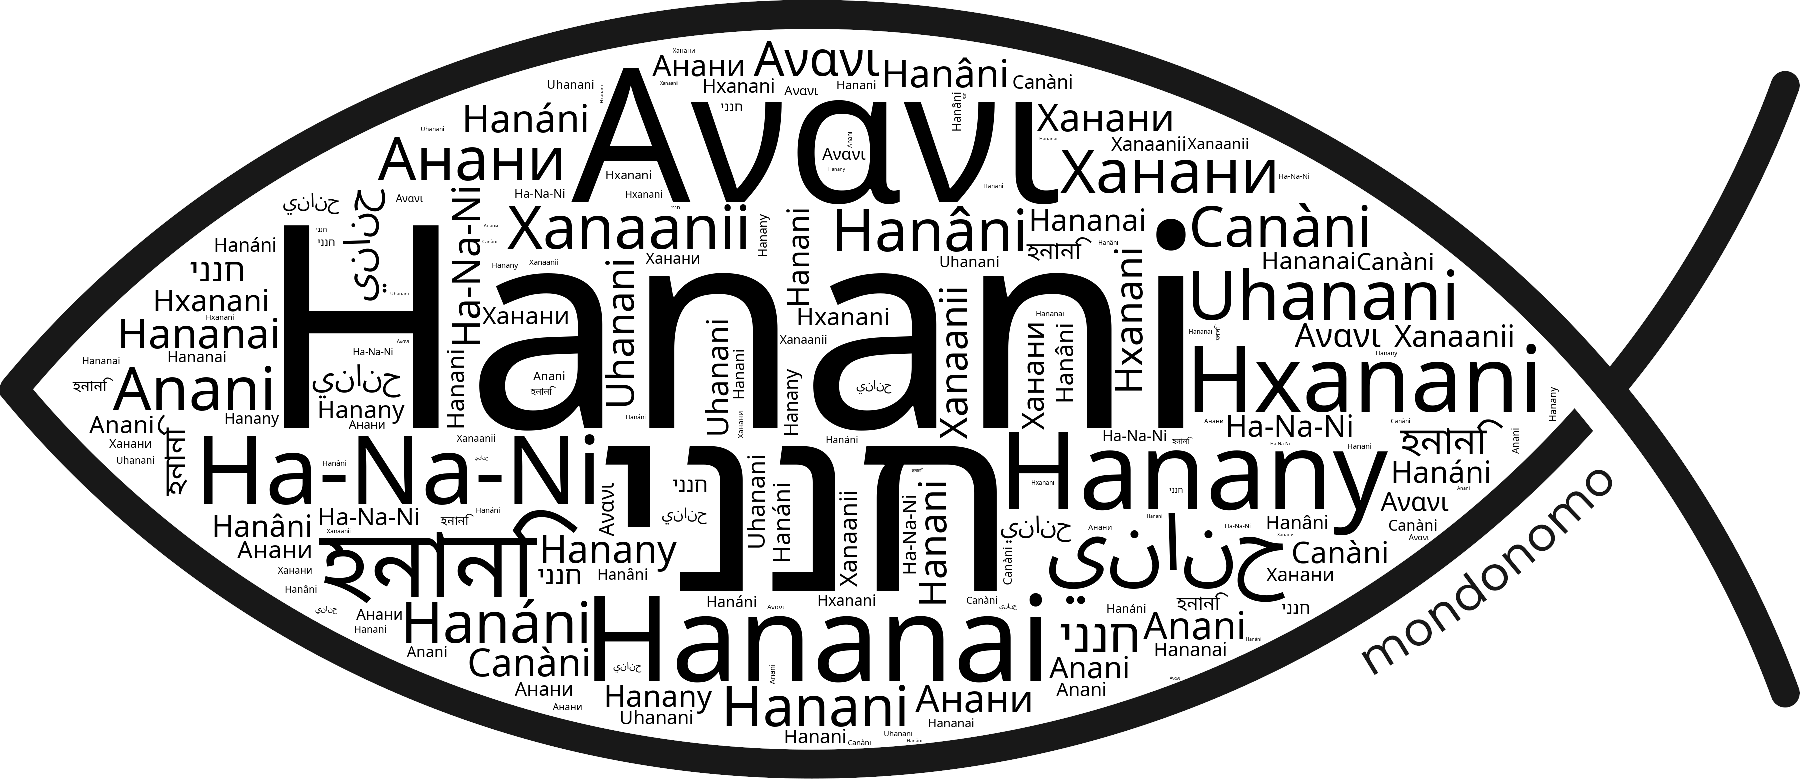 Name Hanani in the world's Bibles